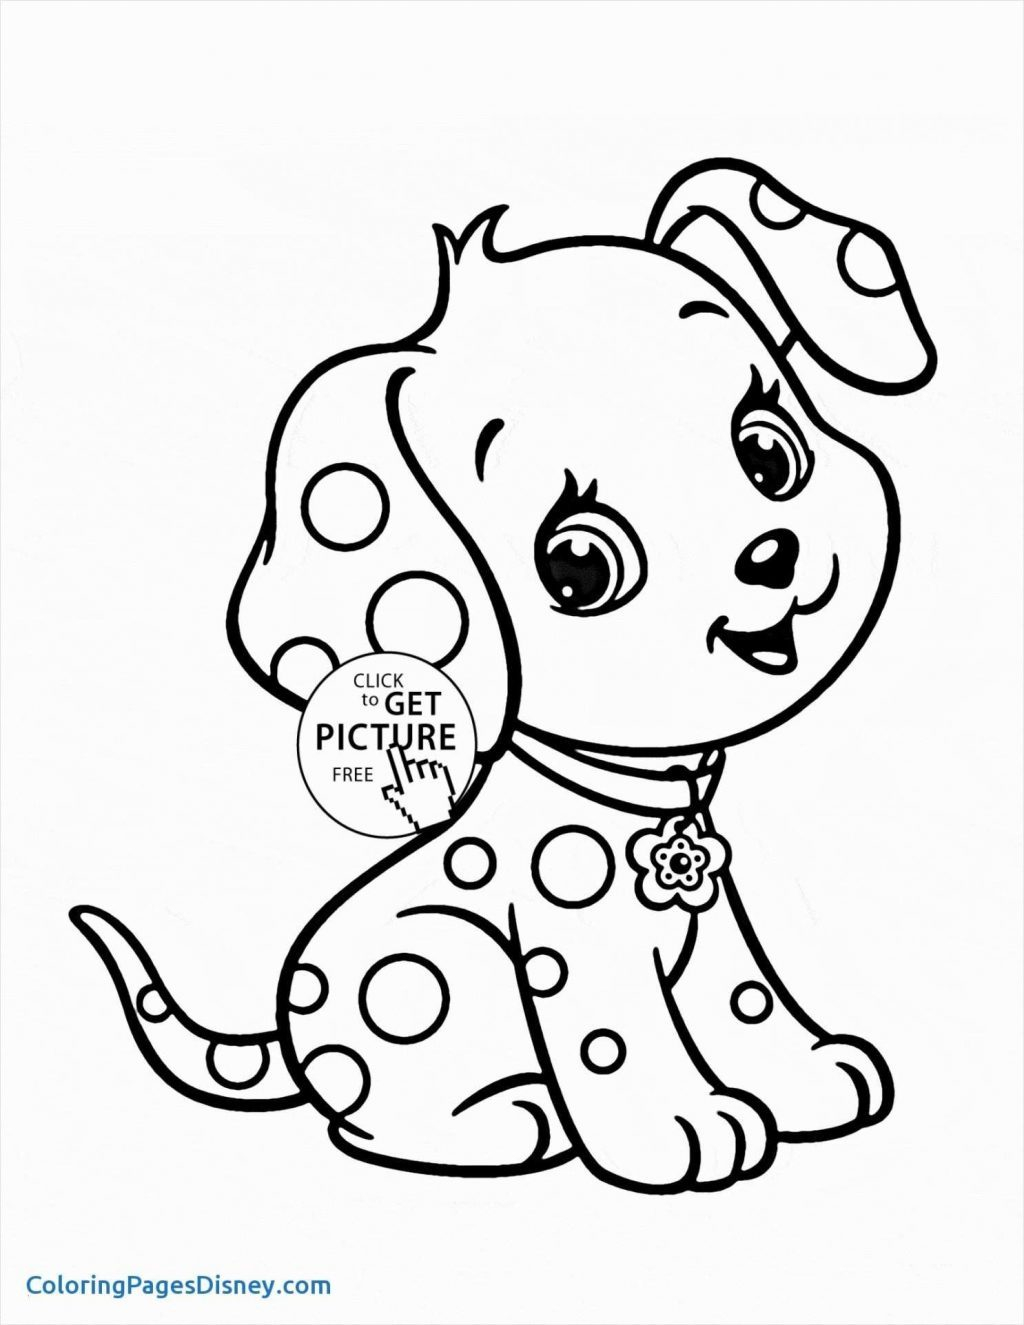 Free Printable Peter Rabbit Coloring Pages Coloring Page Coloring Page Awesome Rabbit Pages Image